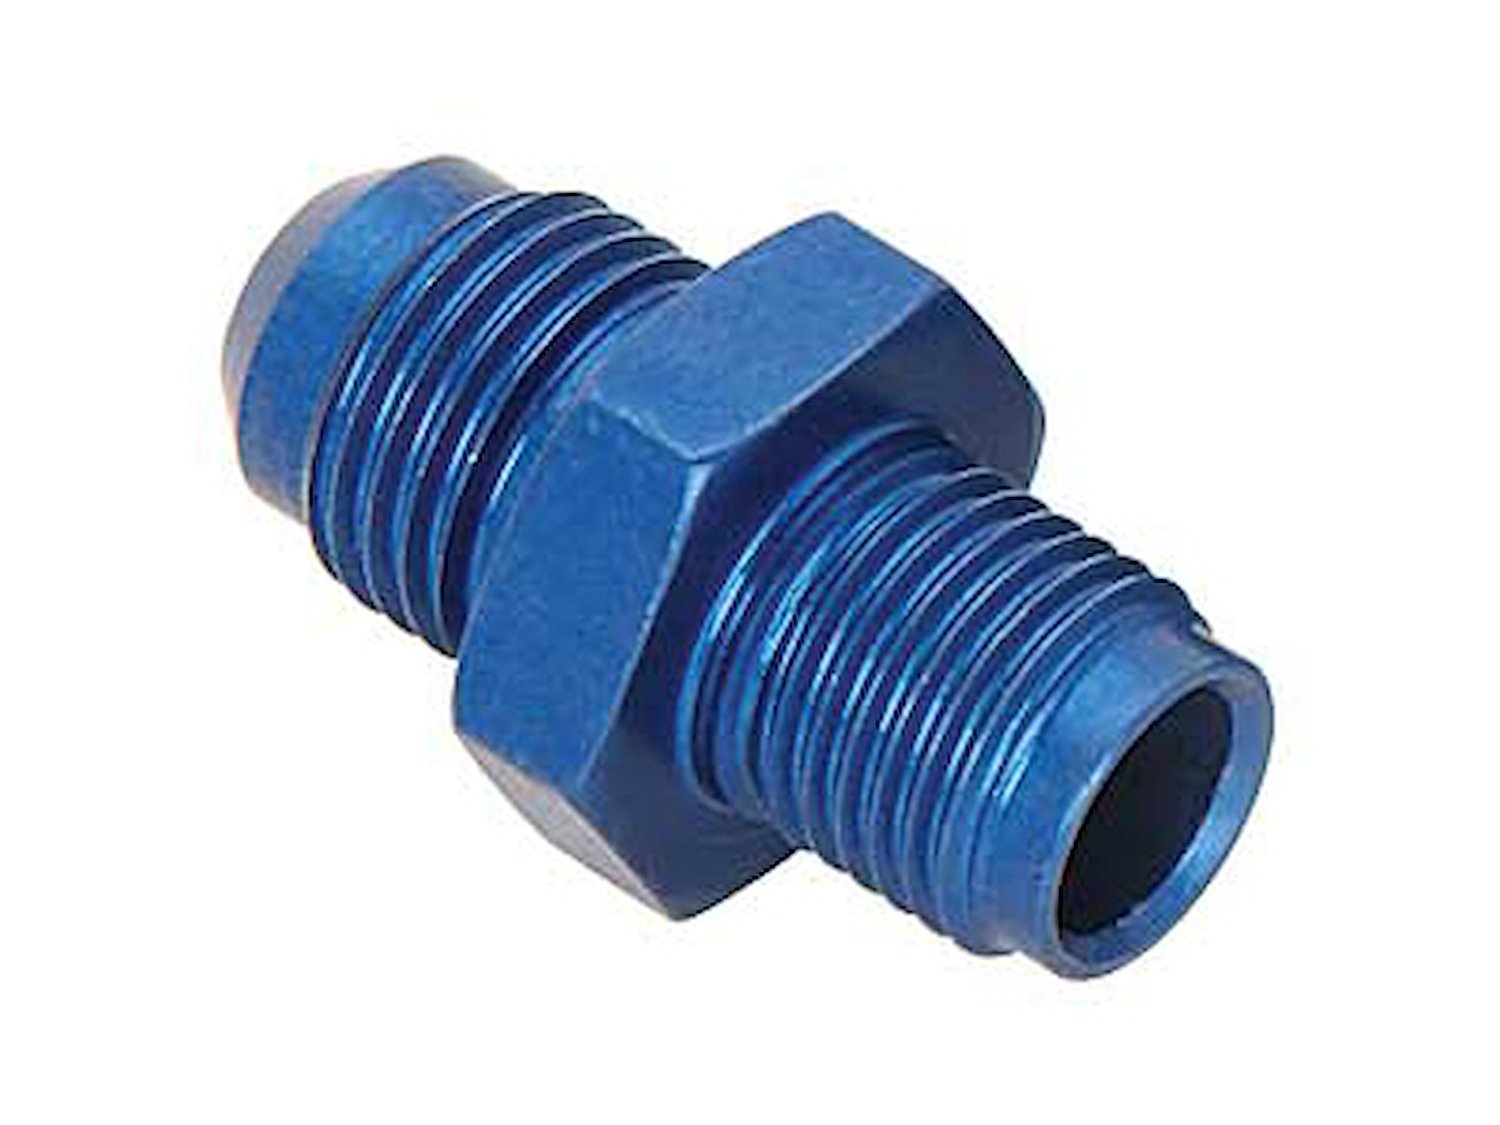 Blue -6AN to 1/2"-20 Fitting Made in the USA